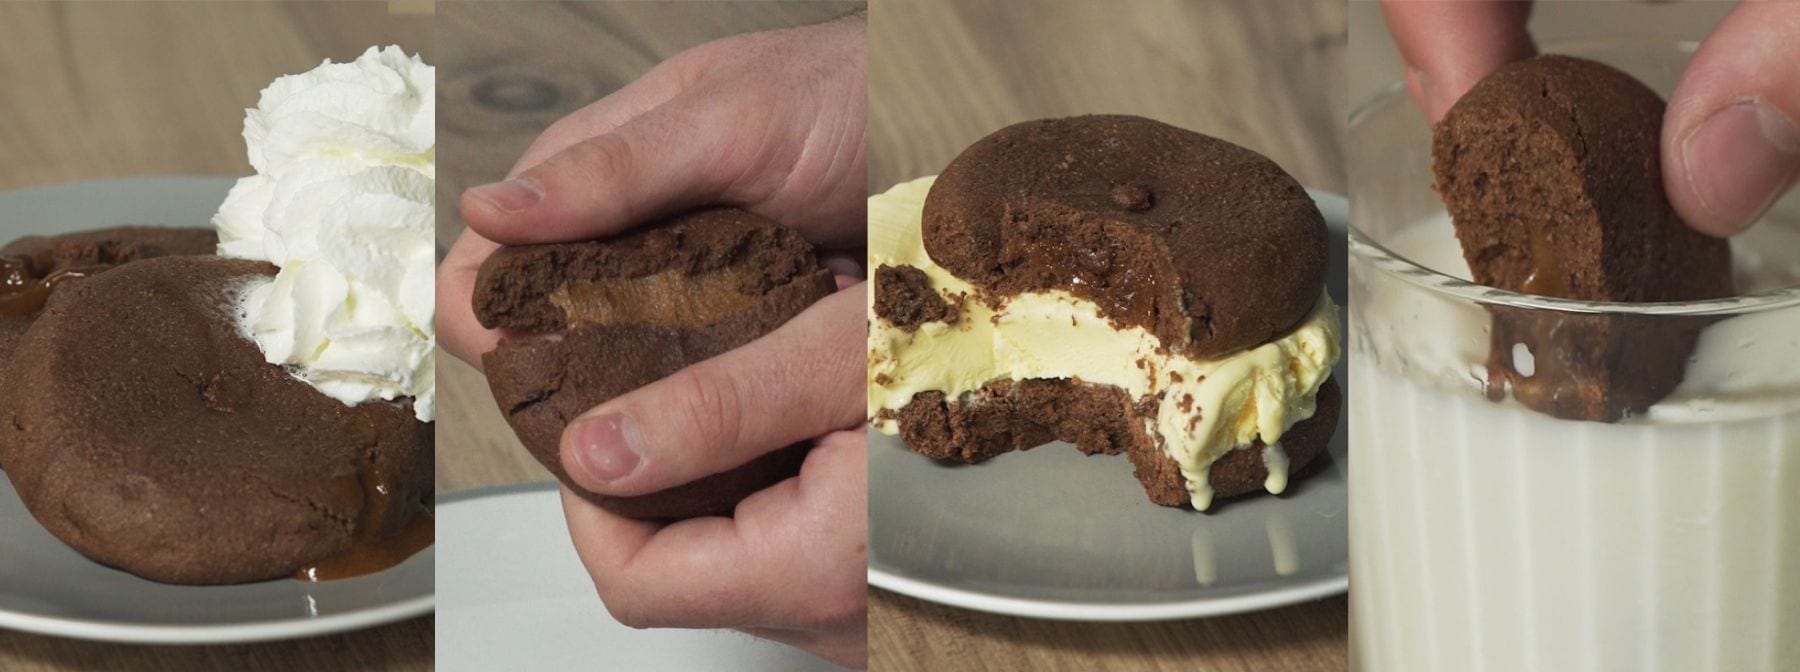 Filled Cookie 4 Ways | Have You Tried The Pull Yet?